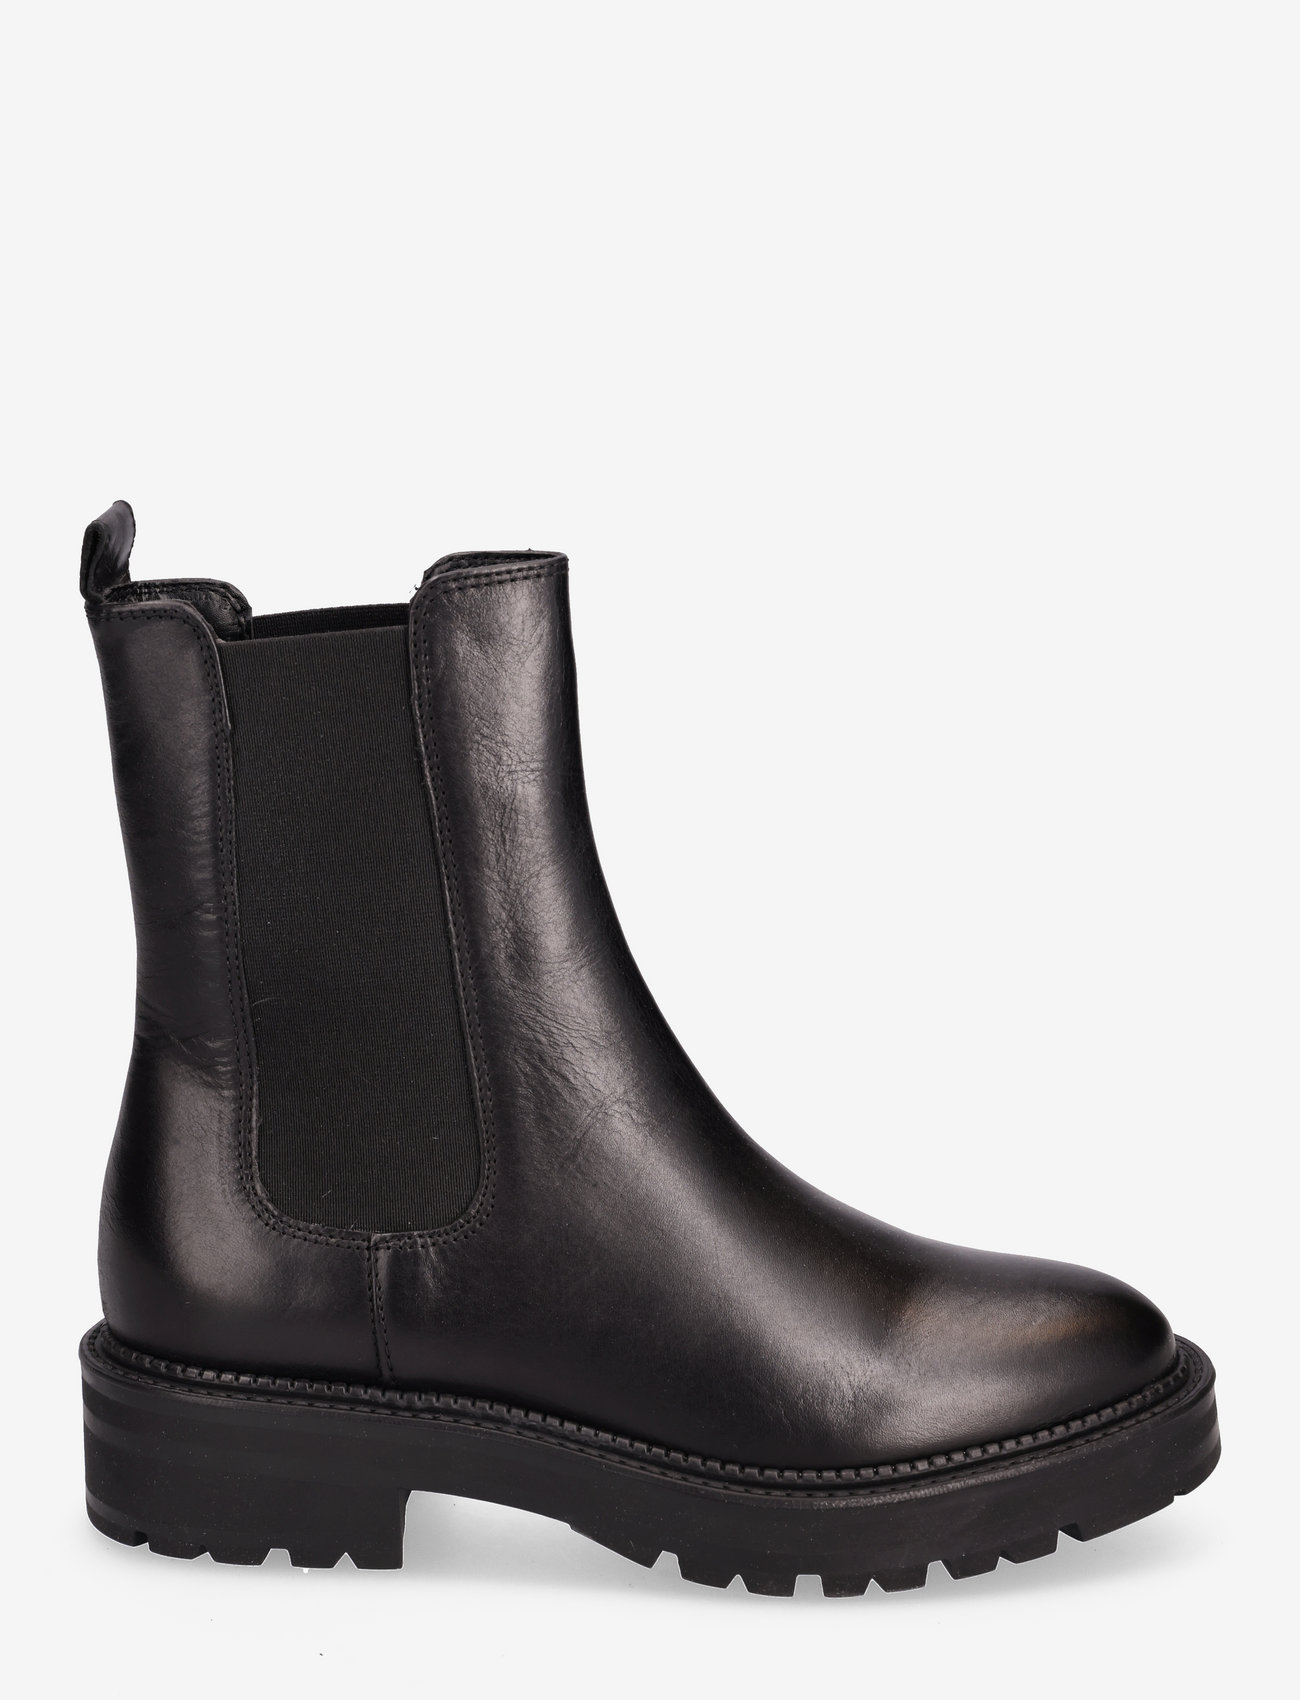 Dune London - picture - flat ankle boots - black - 1